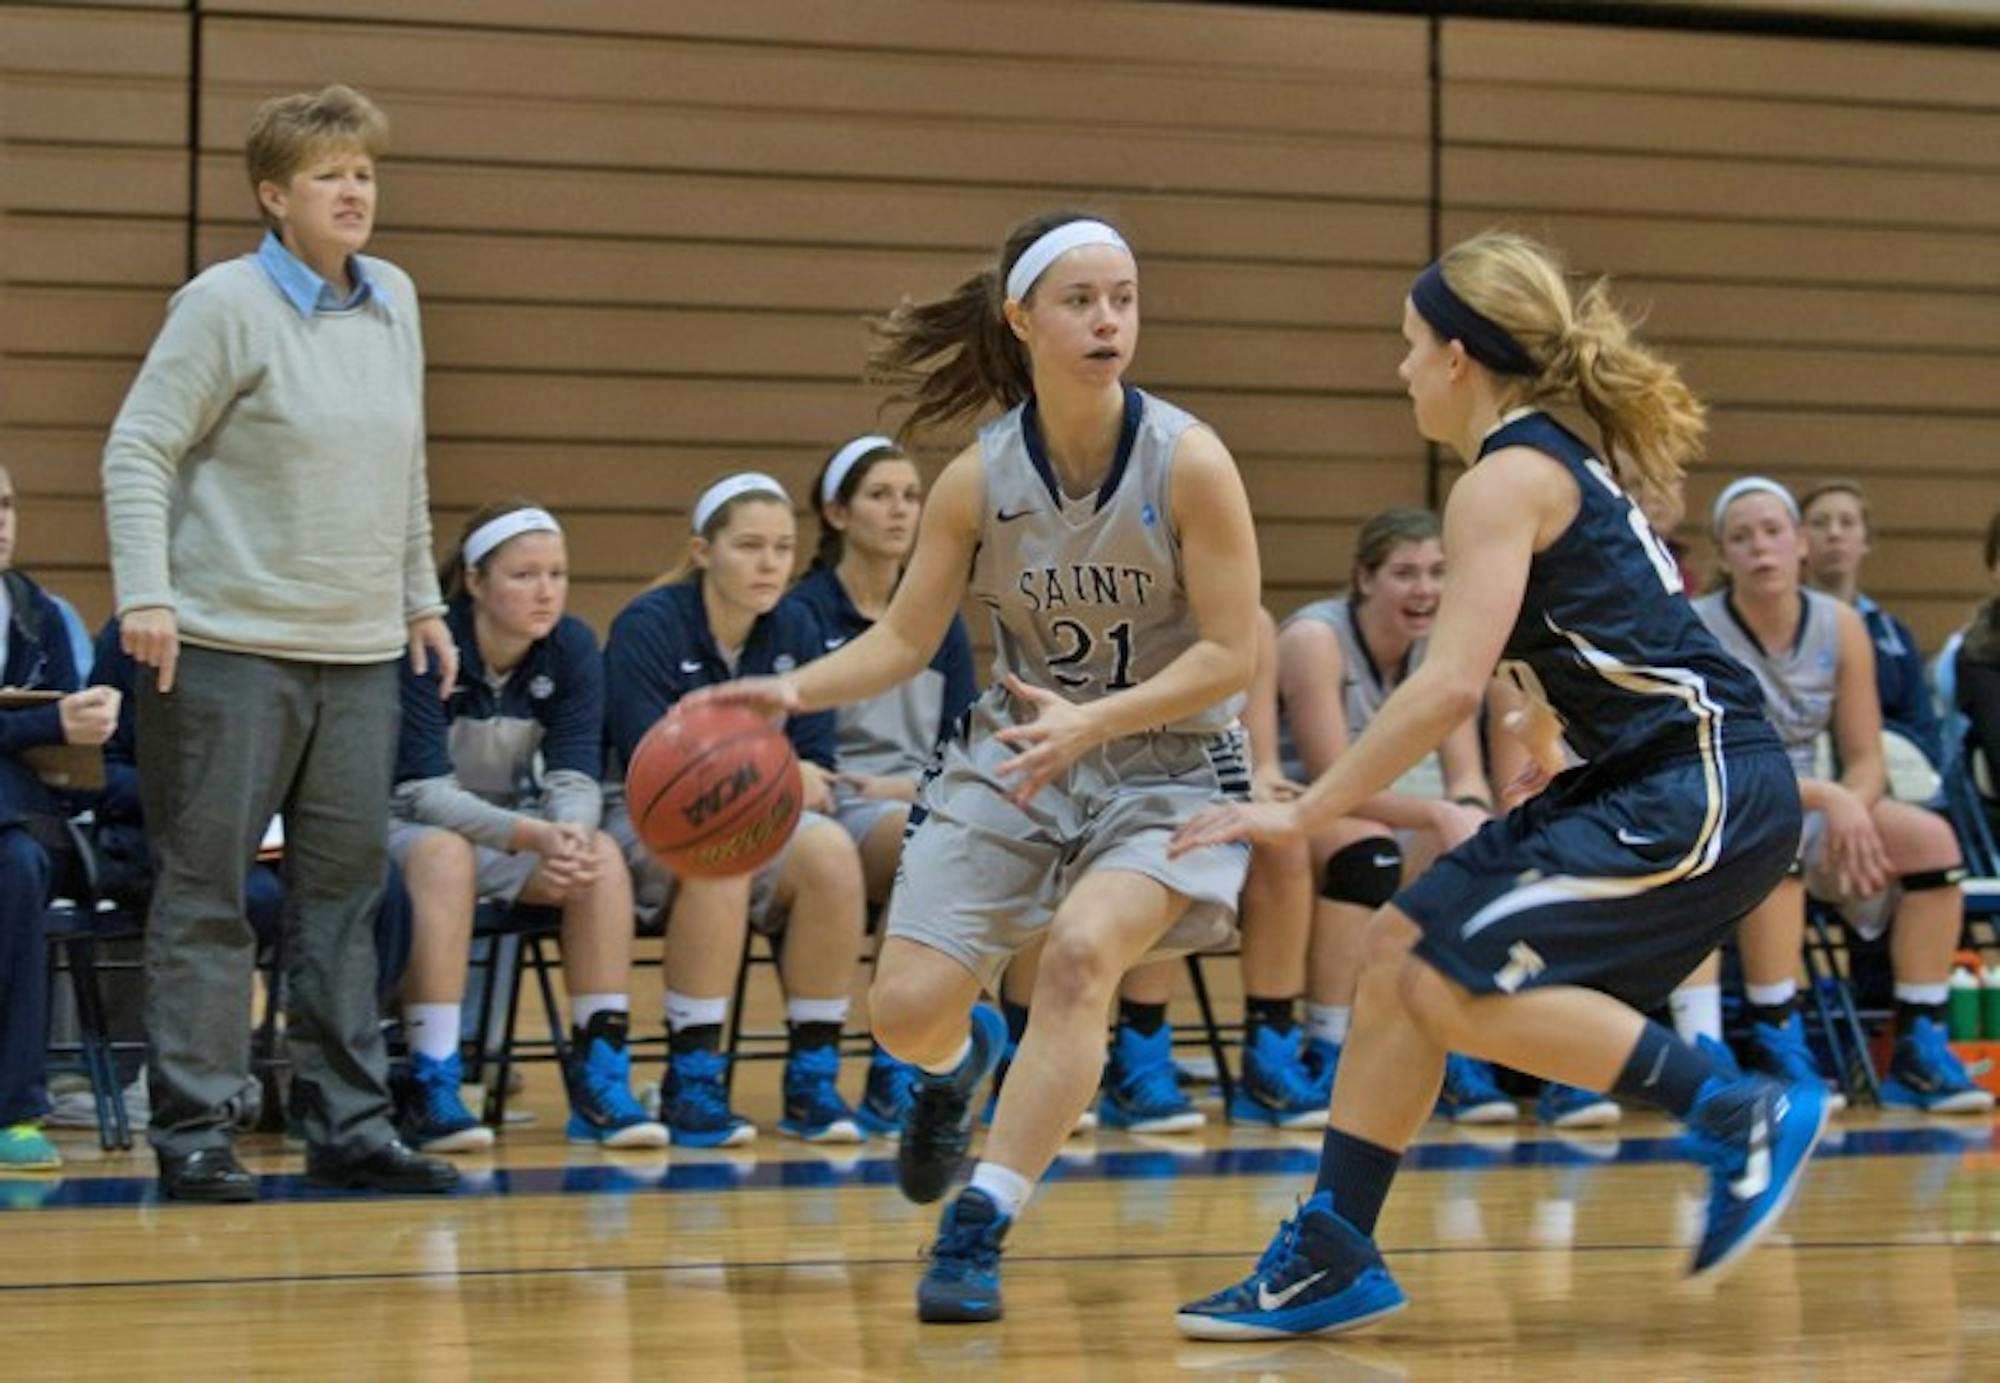 Saint Mary’s junior guard Sarah Macius looks to pass during the Belles’ 70-58 loss to Trine on Jan. 28.